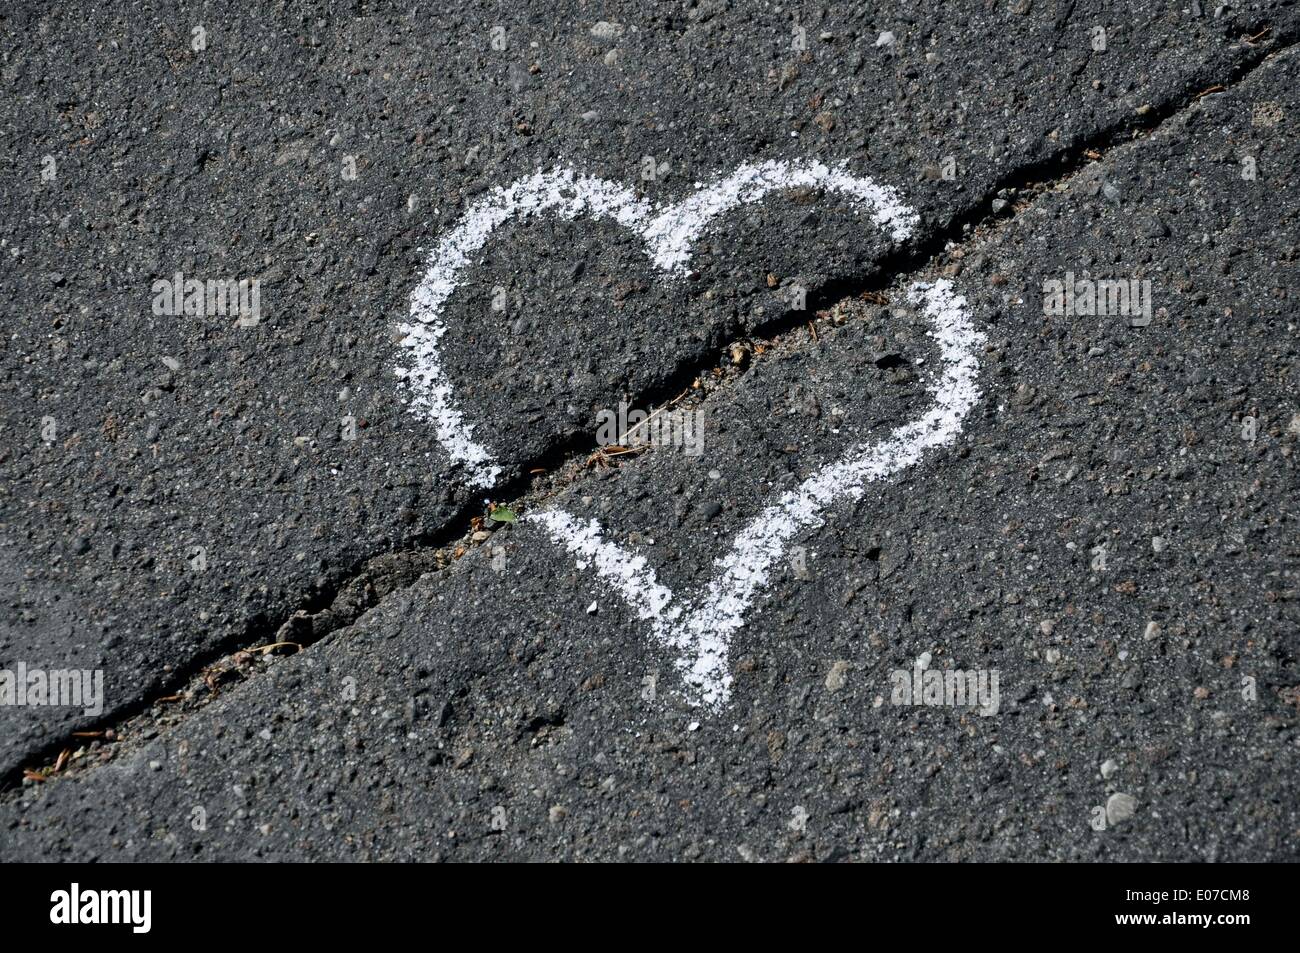 Illustration - A chalk heart is painted on a cracked asphalt road in Germany, 02 June 2011. Photo: Berliner Verlag/Steinach - NO WIRE SERVICE Stock Photo